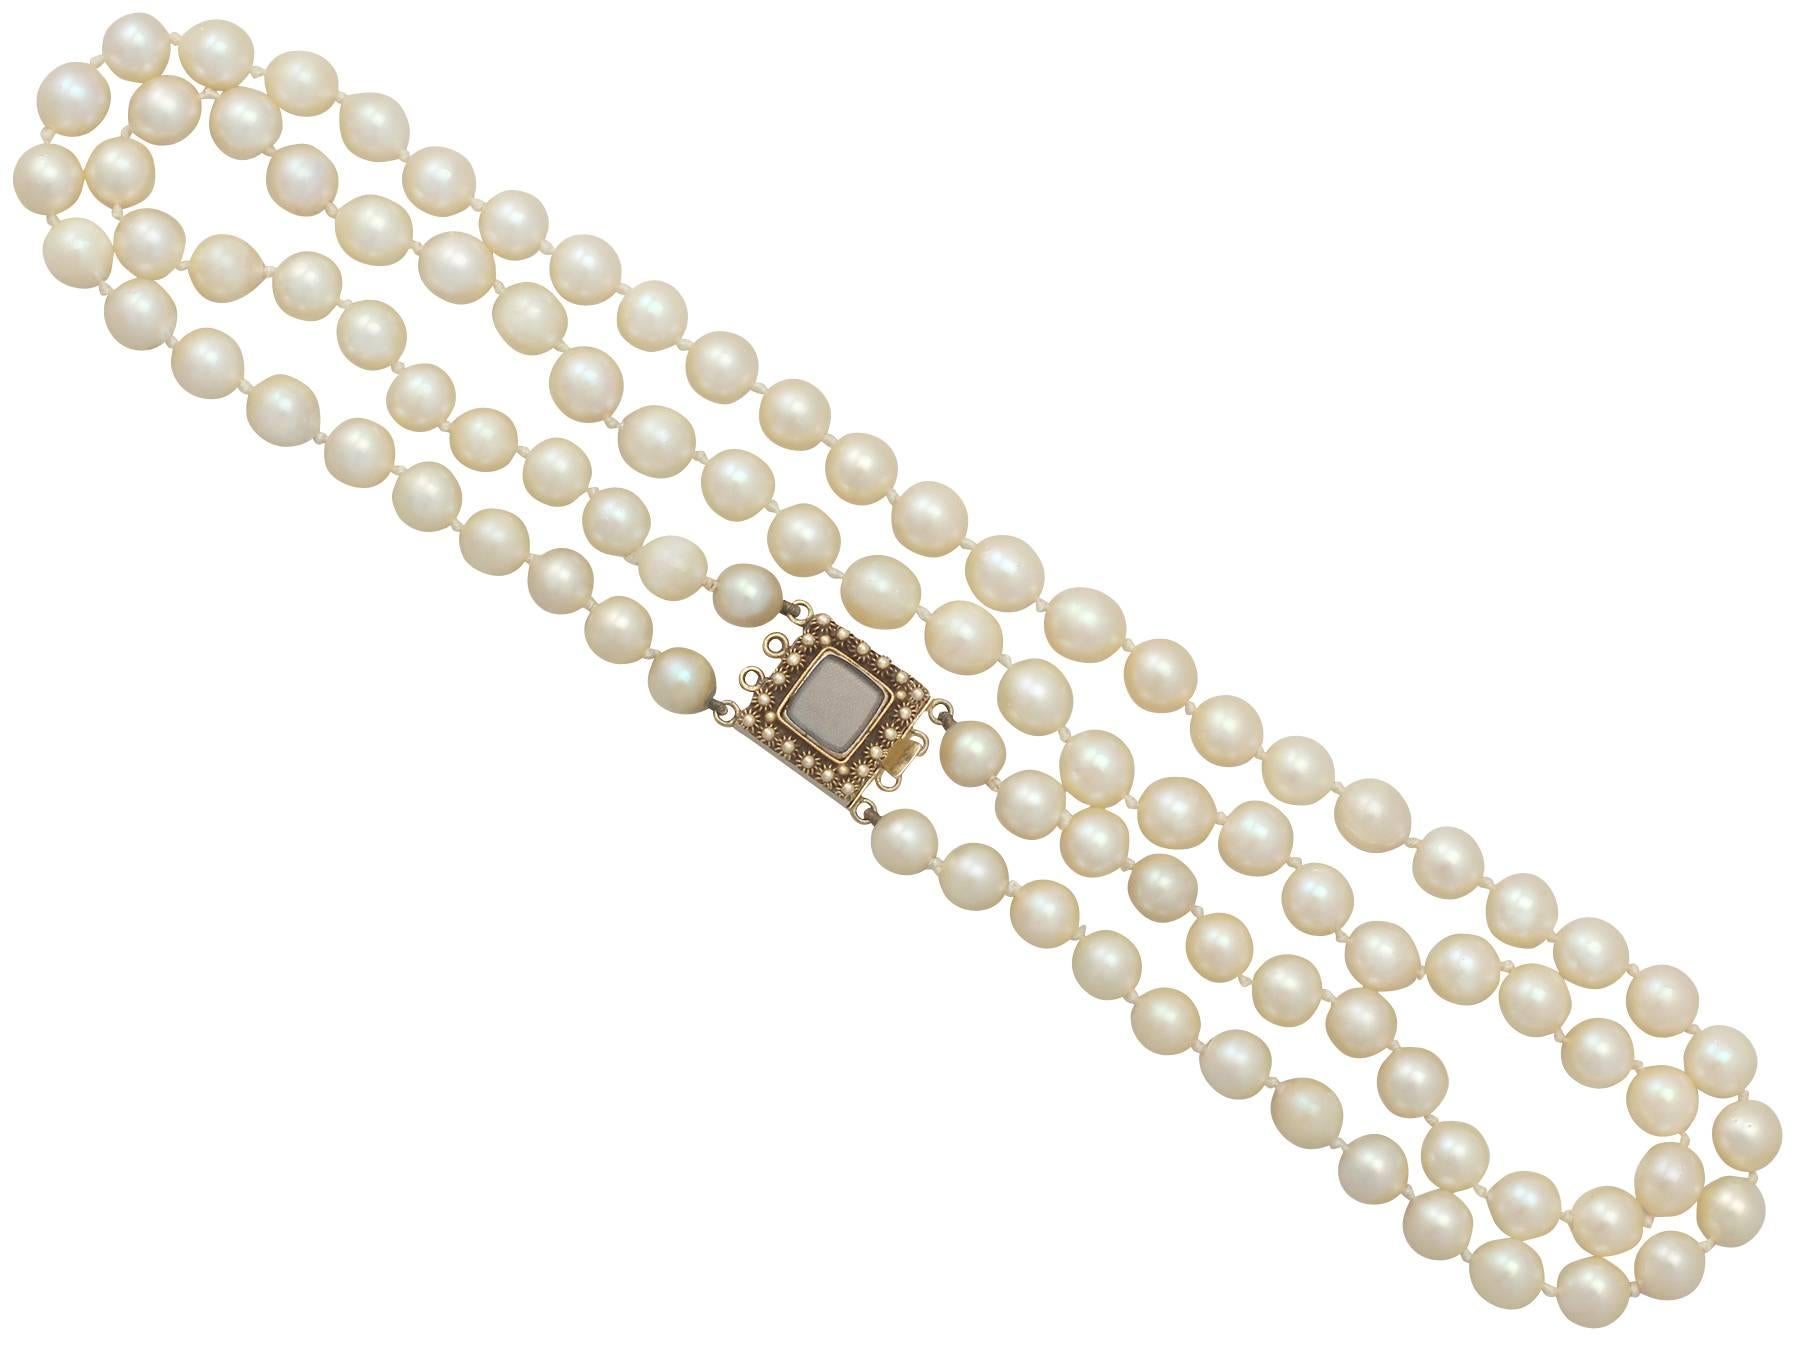 Women's Double Strand Pearl Necklace with 18k Yellow Gold Locket Clasp - Vintage